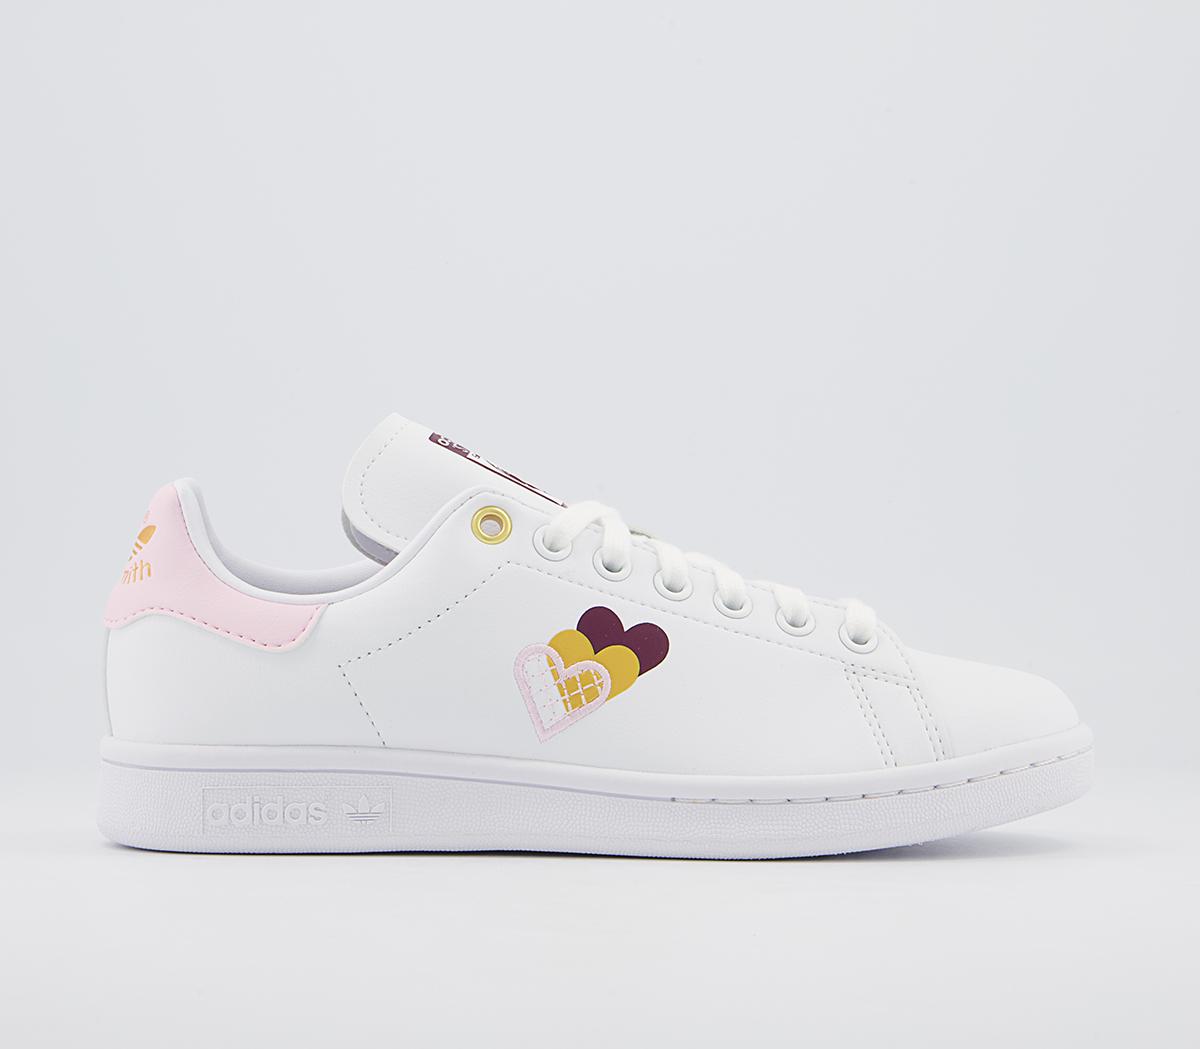 adidasStan Smith TrainersWhite Pink Gold Heart